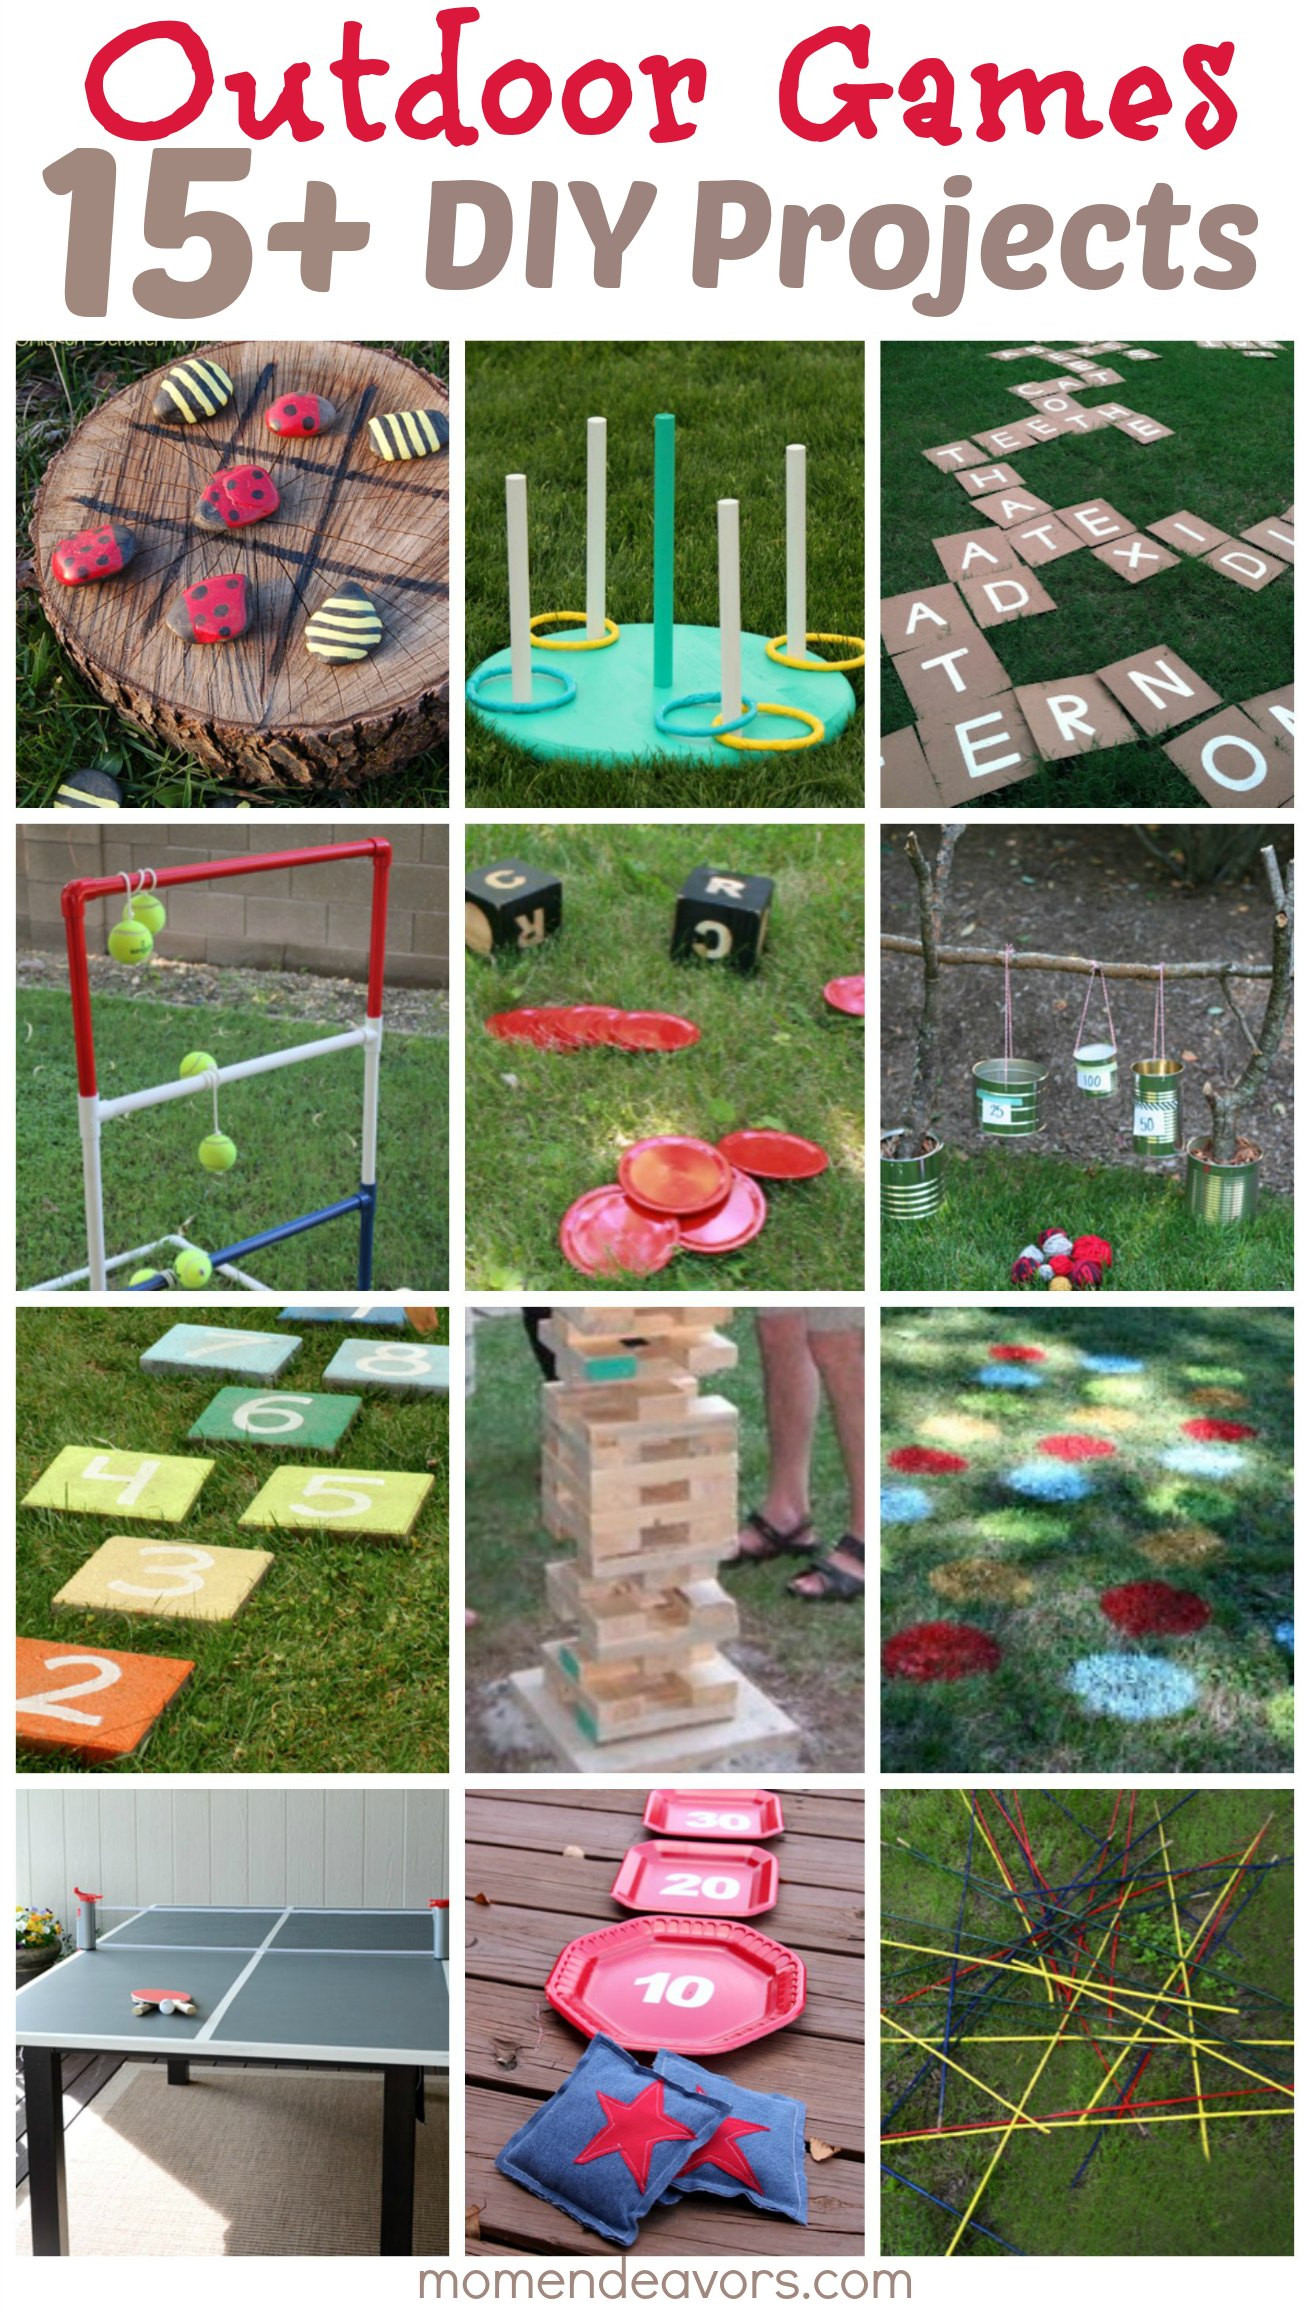 Backyard Party Games Ideas
 DIY Outdoor Games – 15 Awesome Project Ideas for Backyard